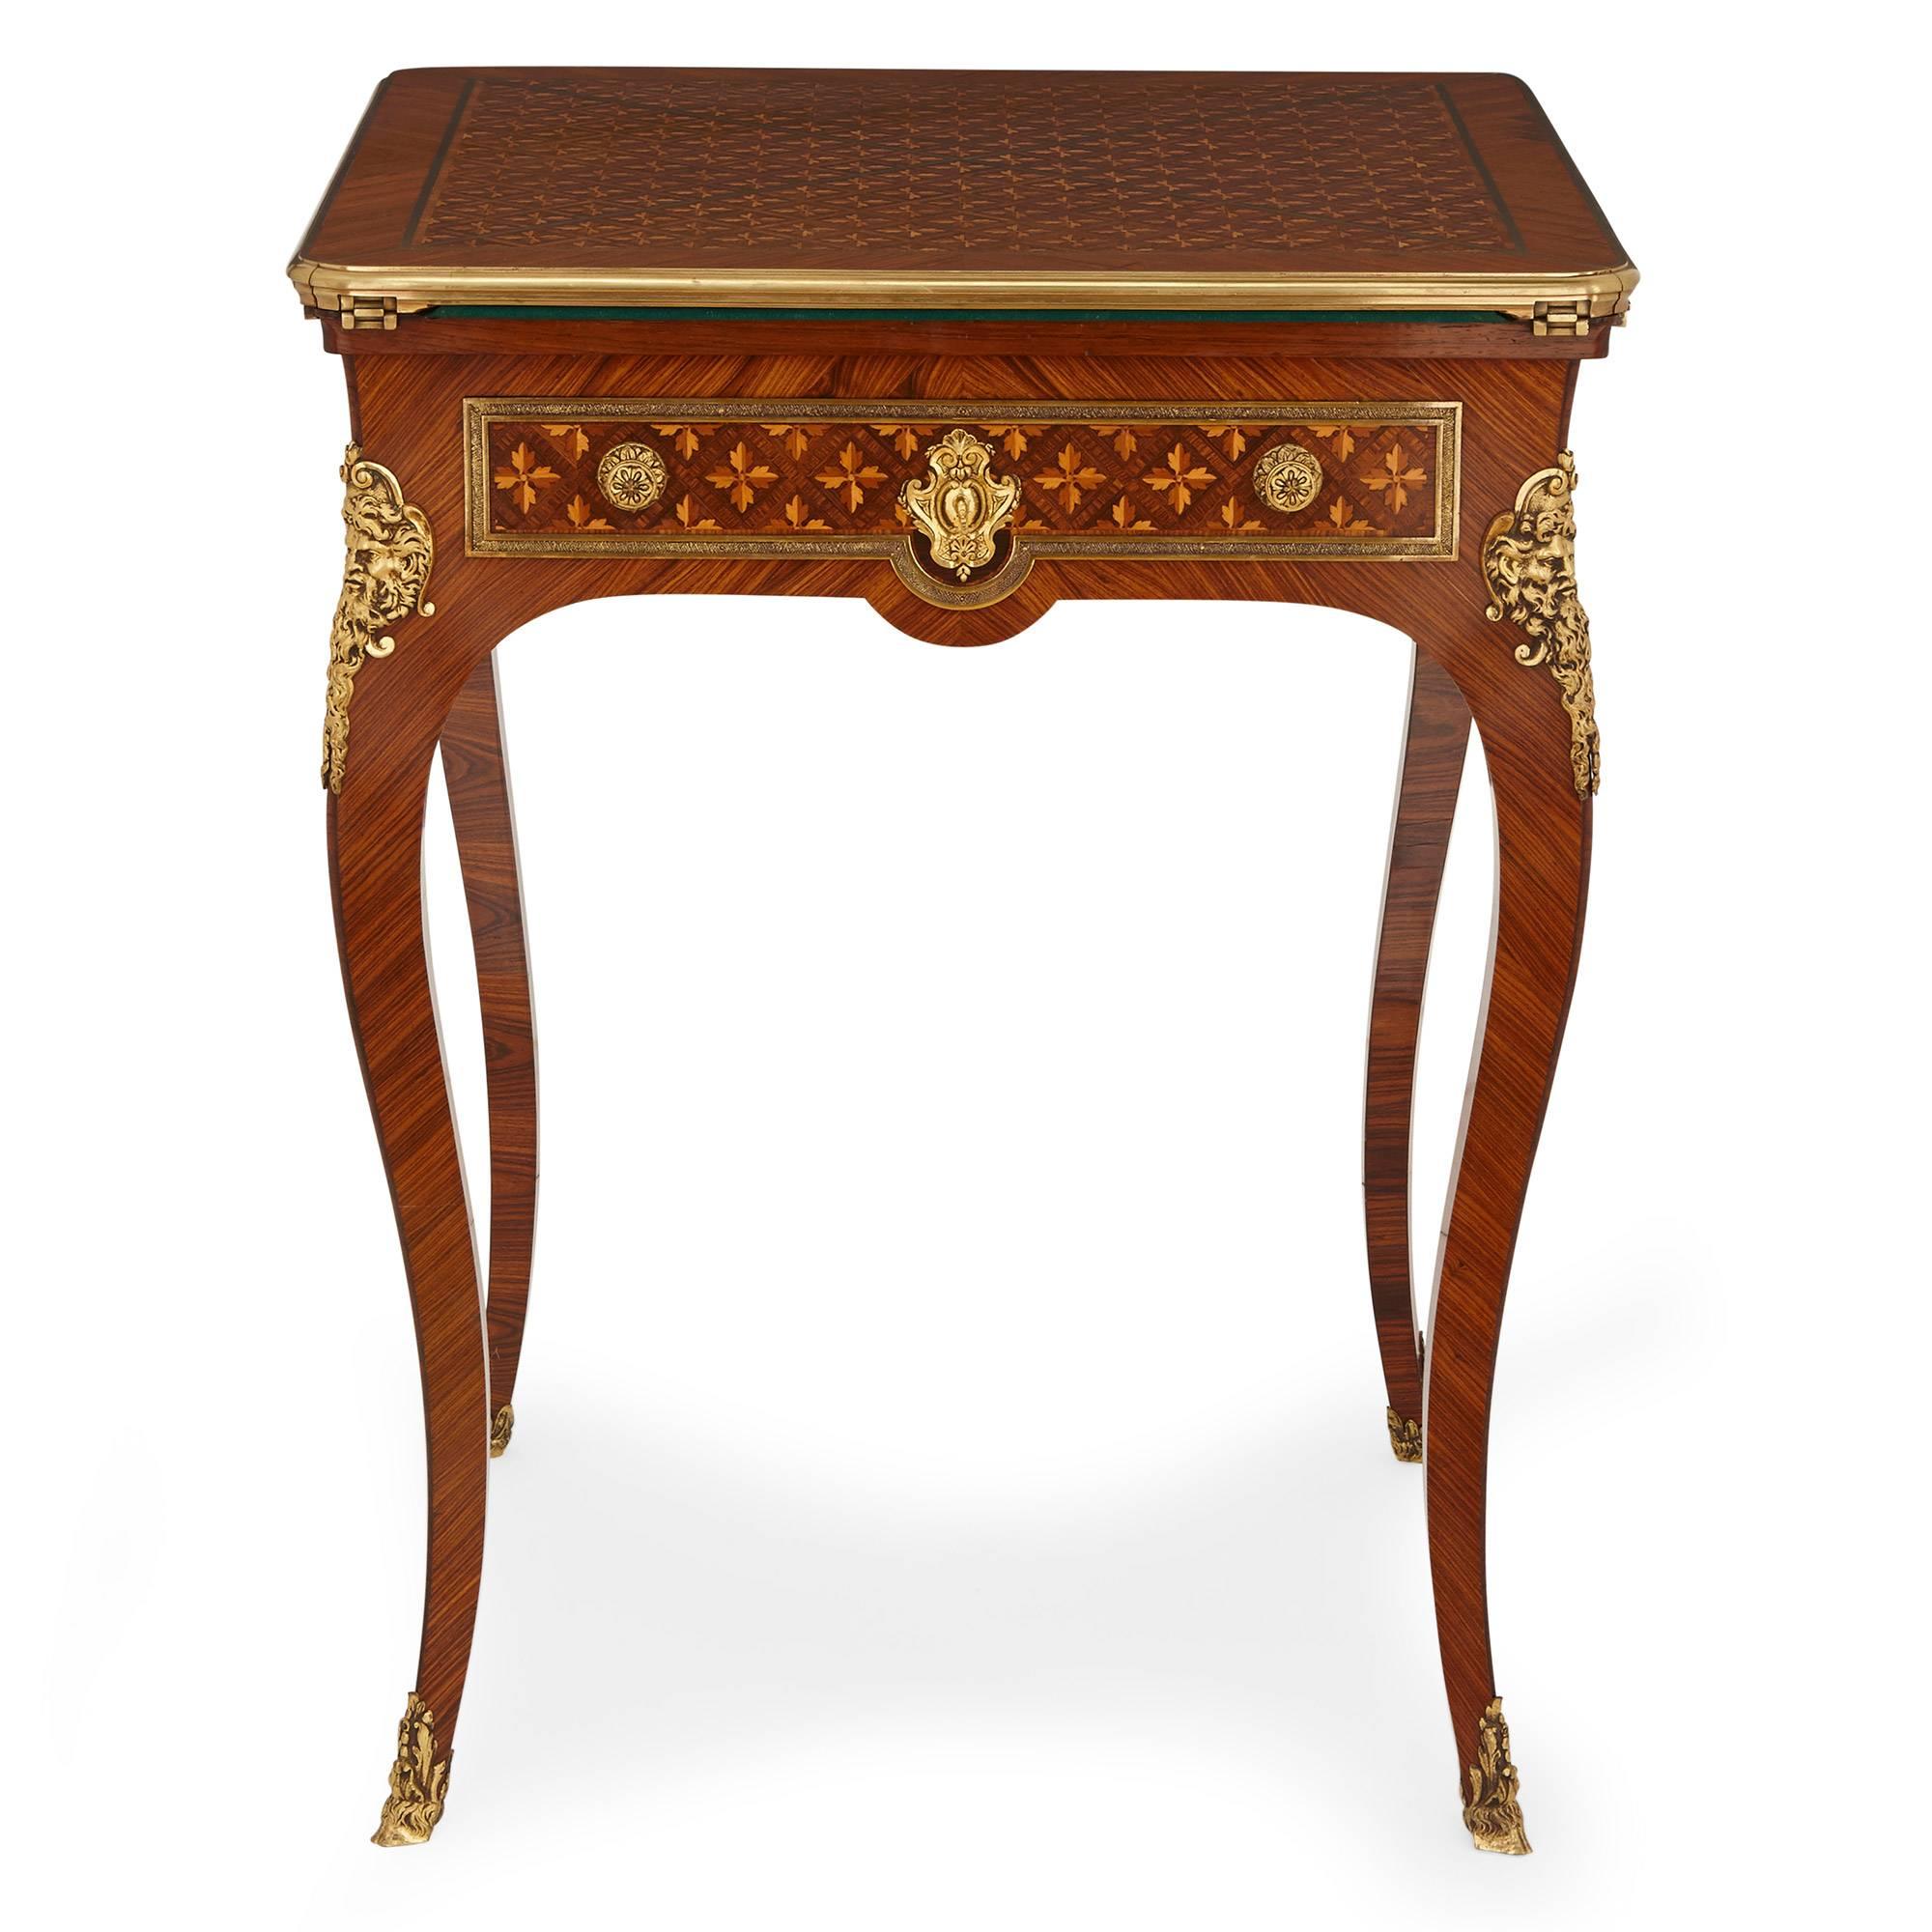 The top of this fine, antique folding card table features a parquetry pattern of acanthus leaves in contrasting rosewood, kingwood and fruitwood. The tabletop is mounted in ormolu around the edges and folds outwards to open into a green baize